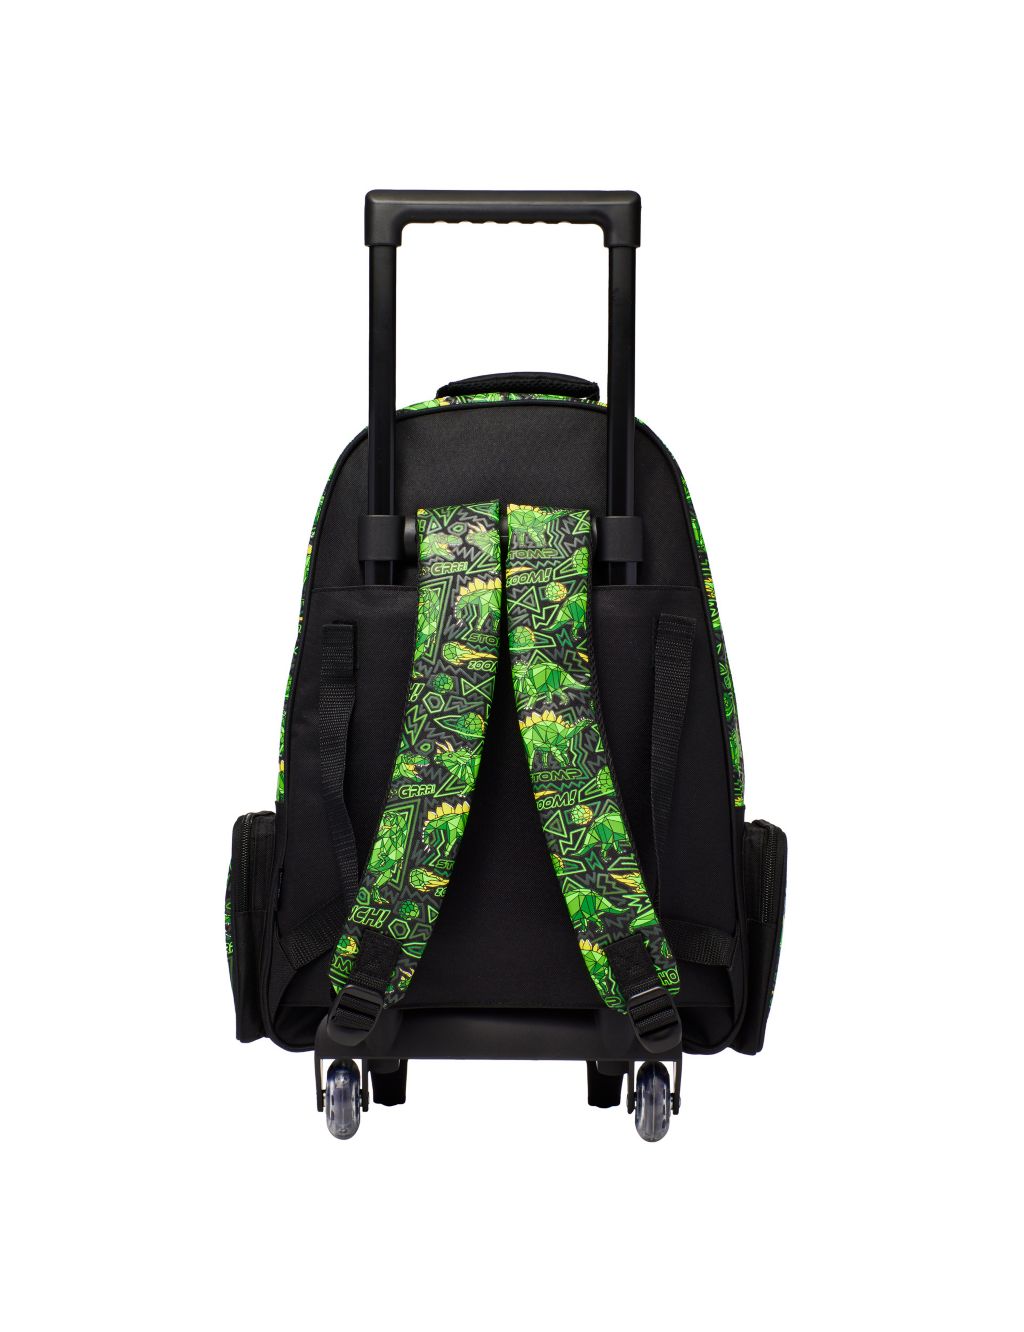 Kids' Patterned Trolley Backpack (3+ Yrs) image 3